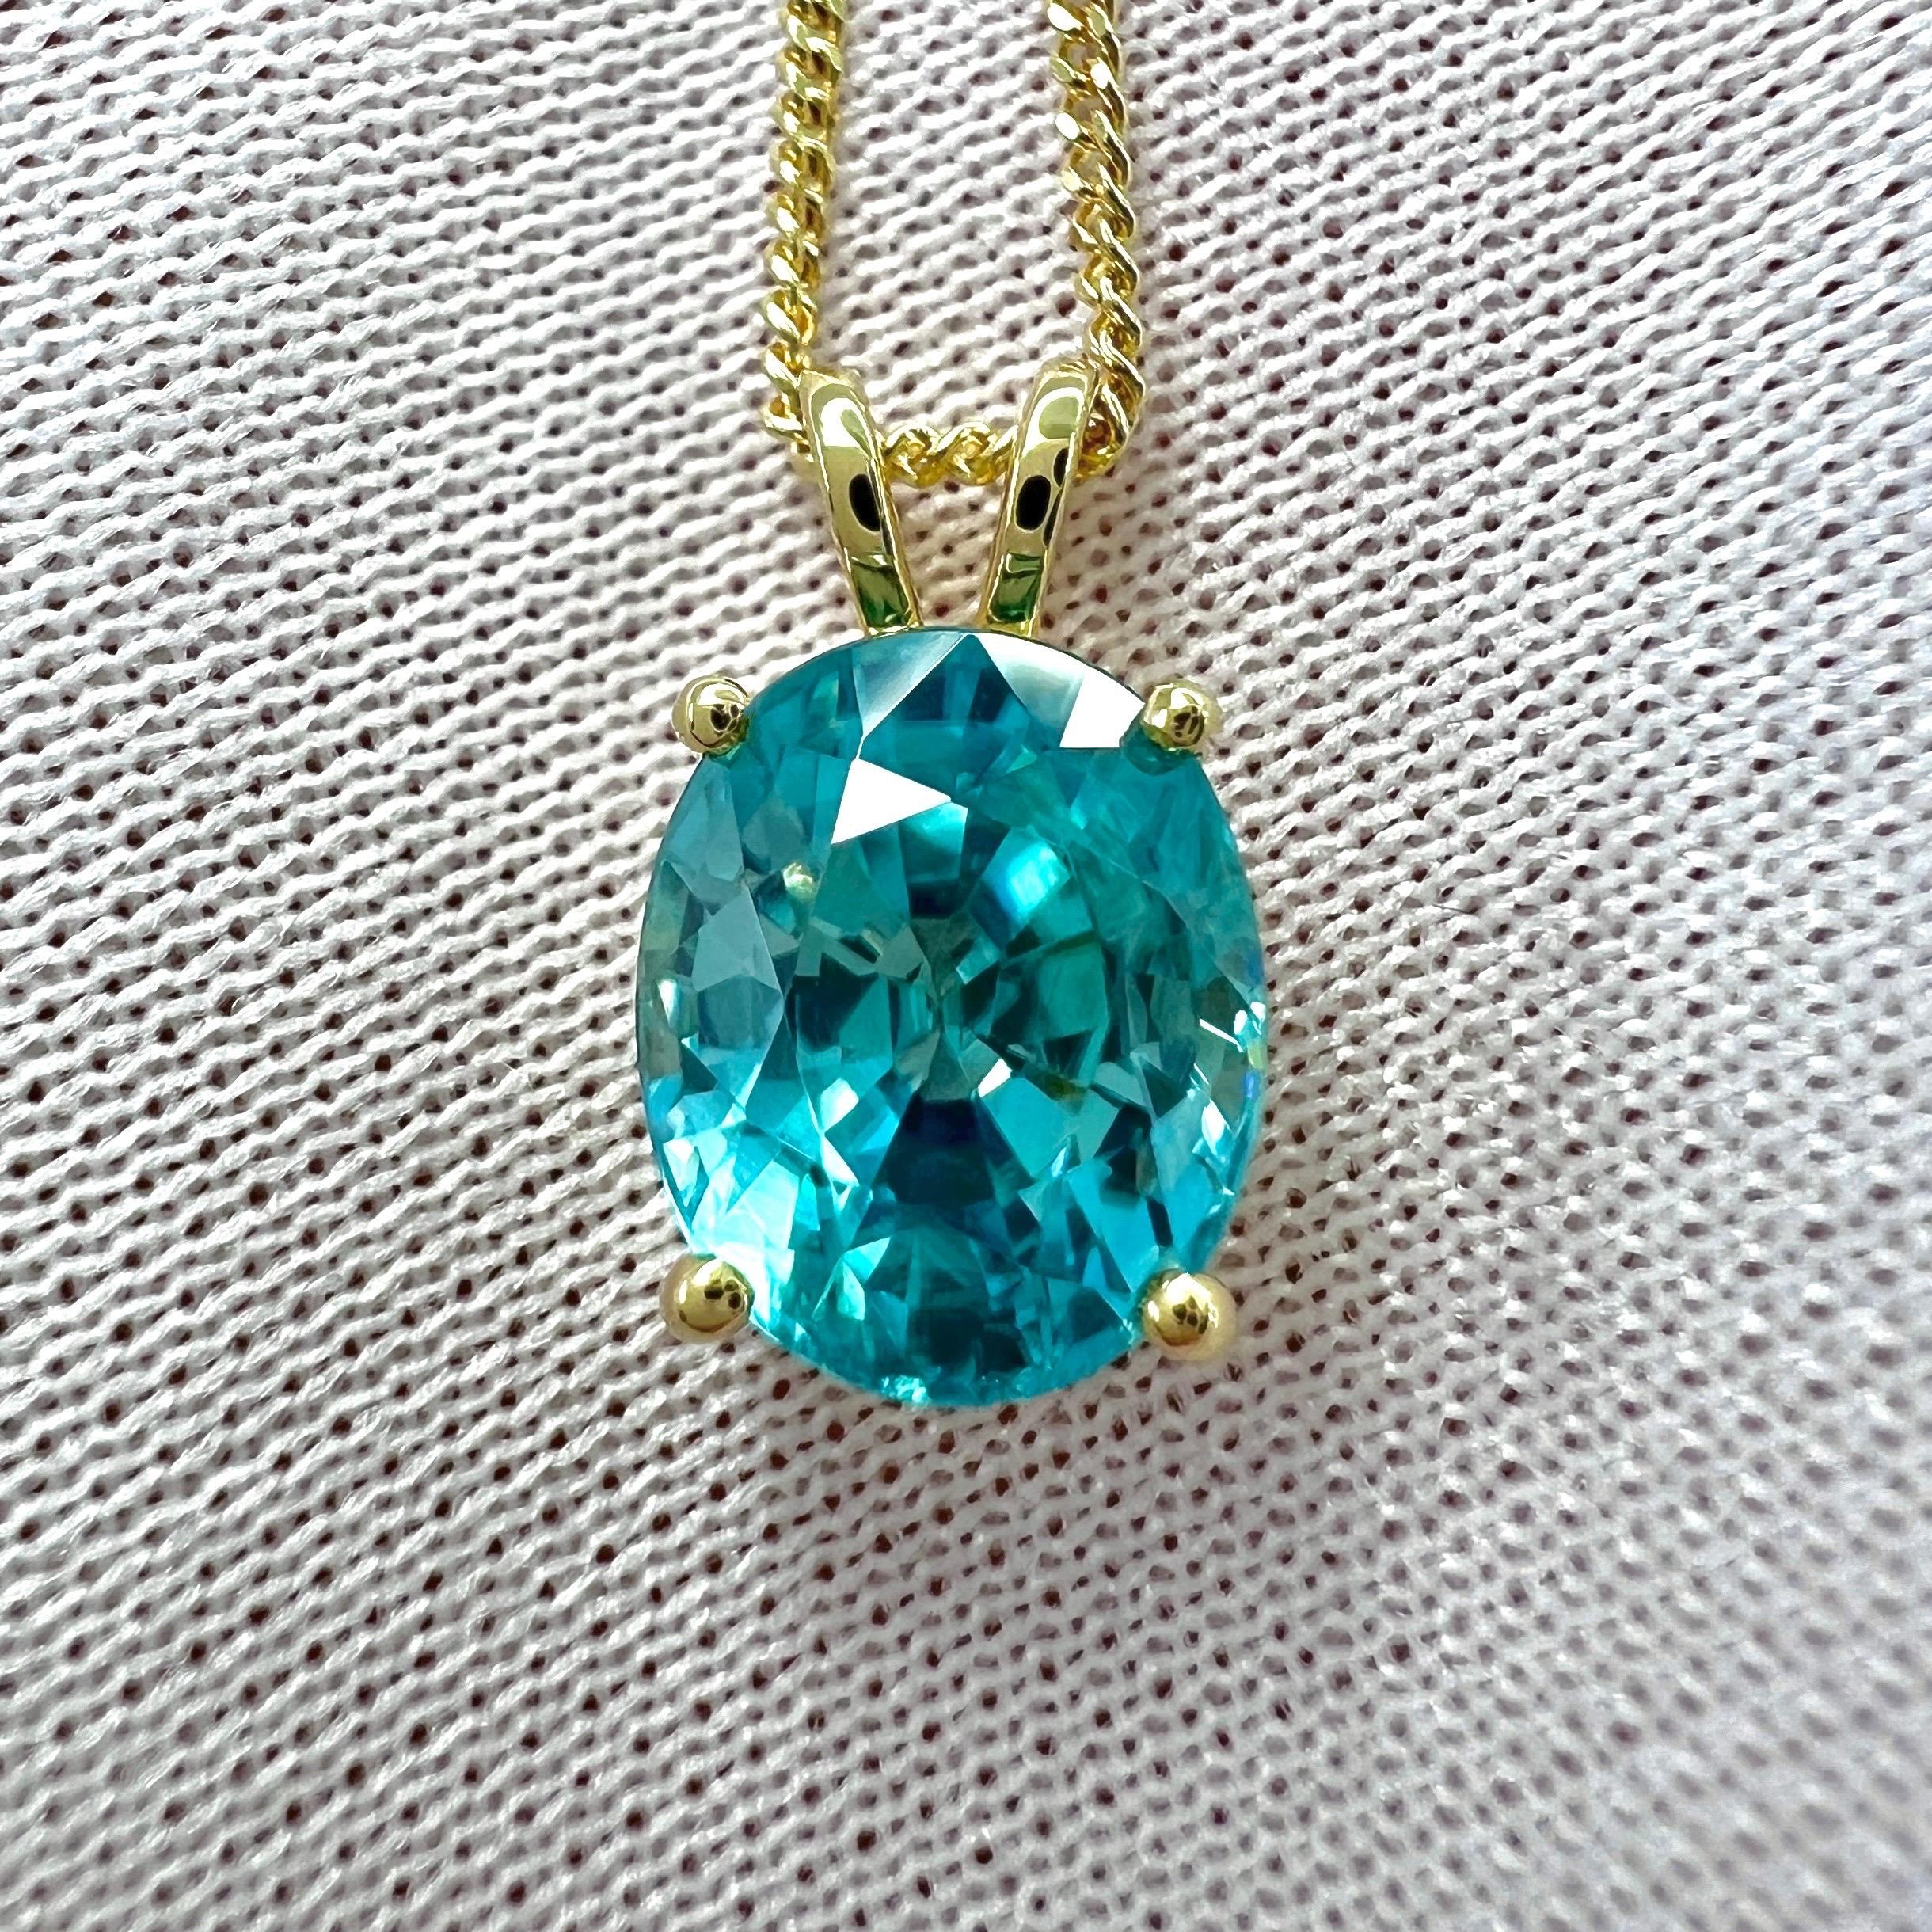 Natural Blue Zircon 3.78ct Oval Cut 18k Yellow Gold Pendant Necklace For Sale 2